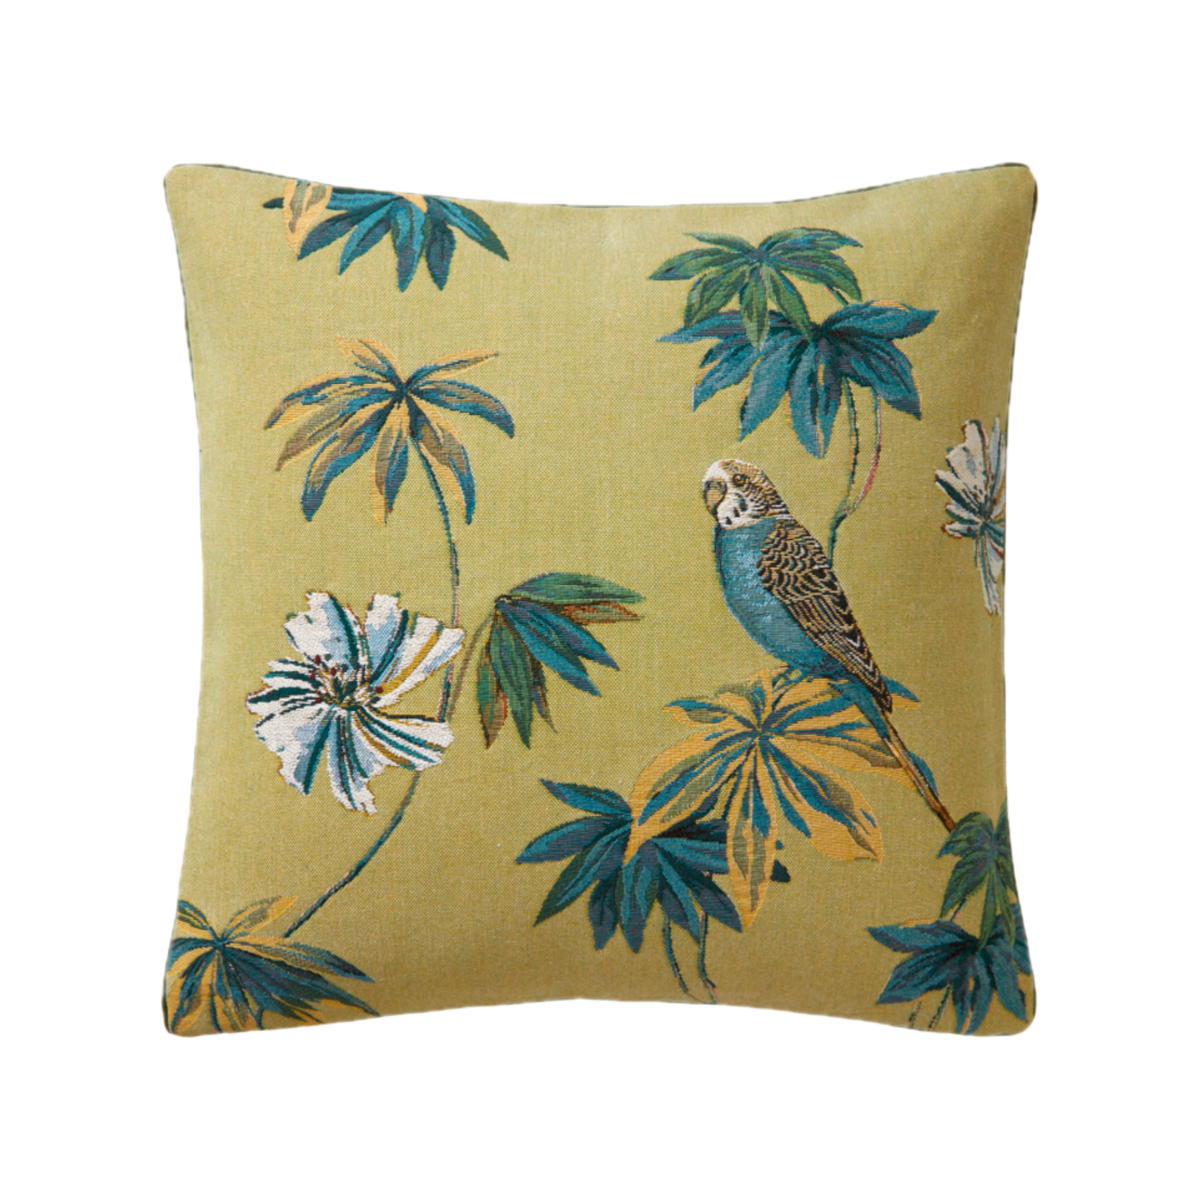 Decorative Pillow of Yves Delorme Tropical Bedding in Avocat Color